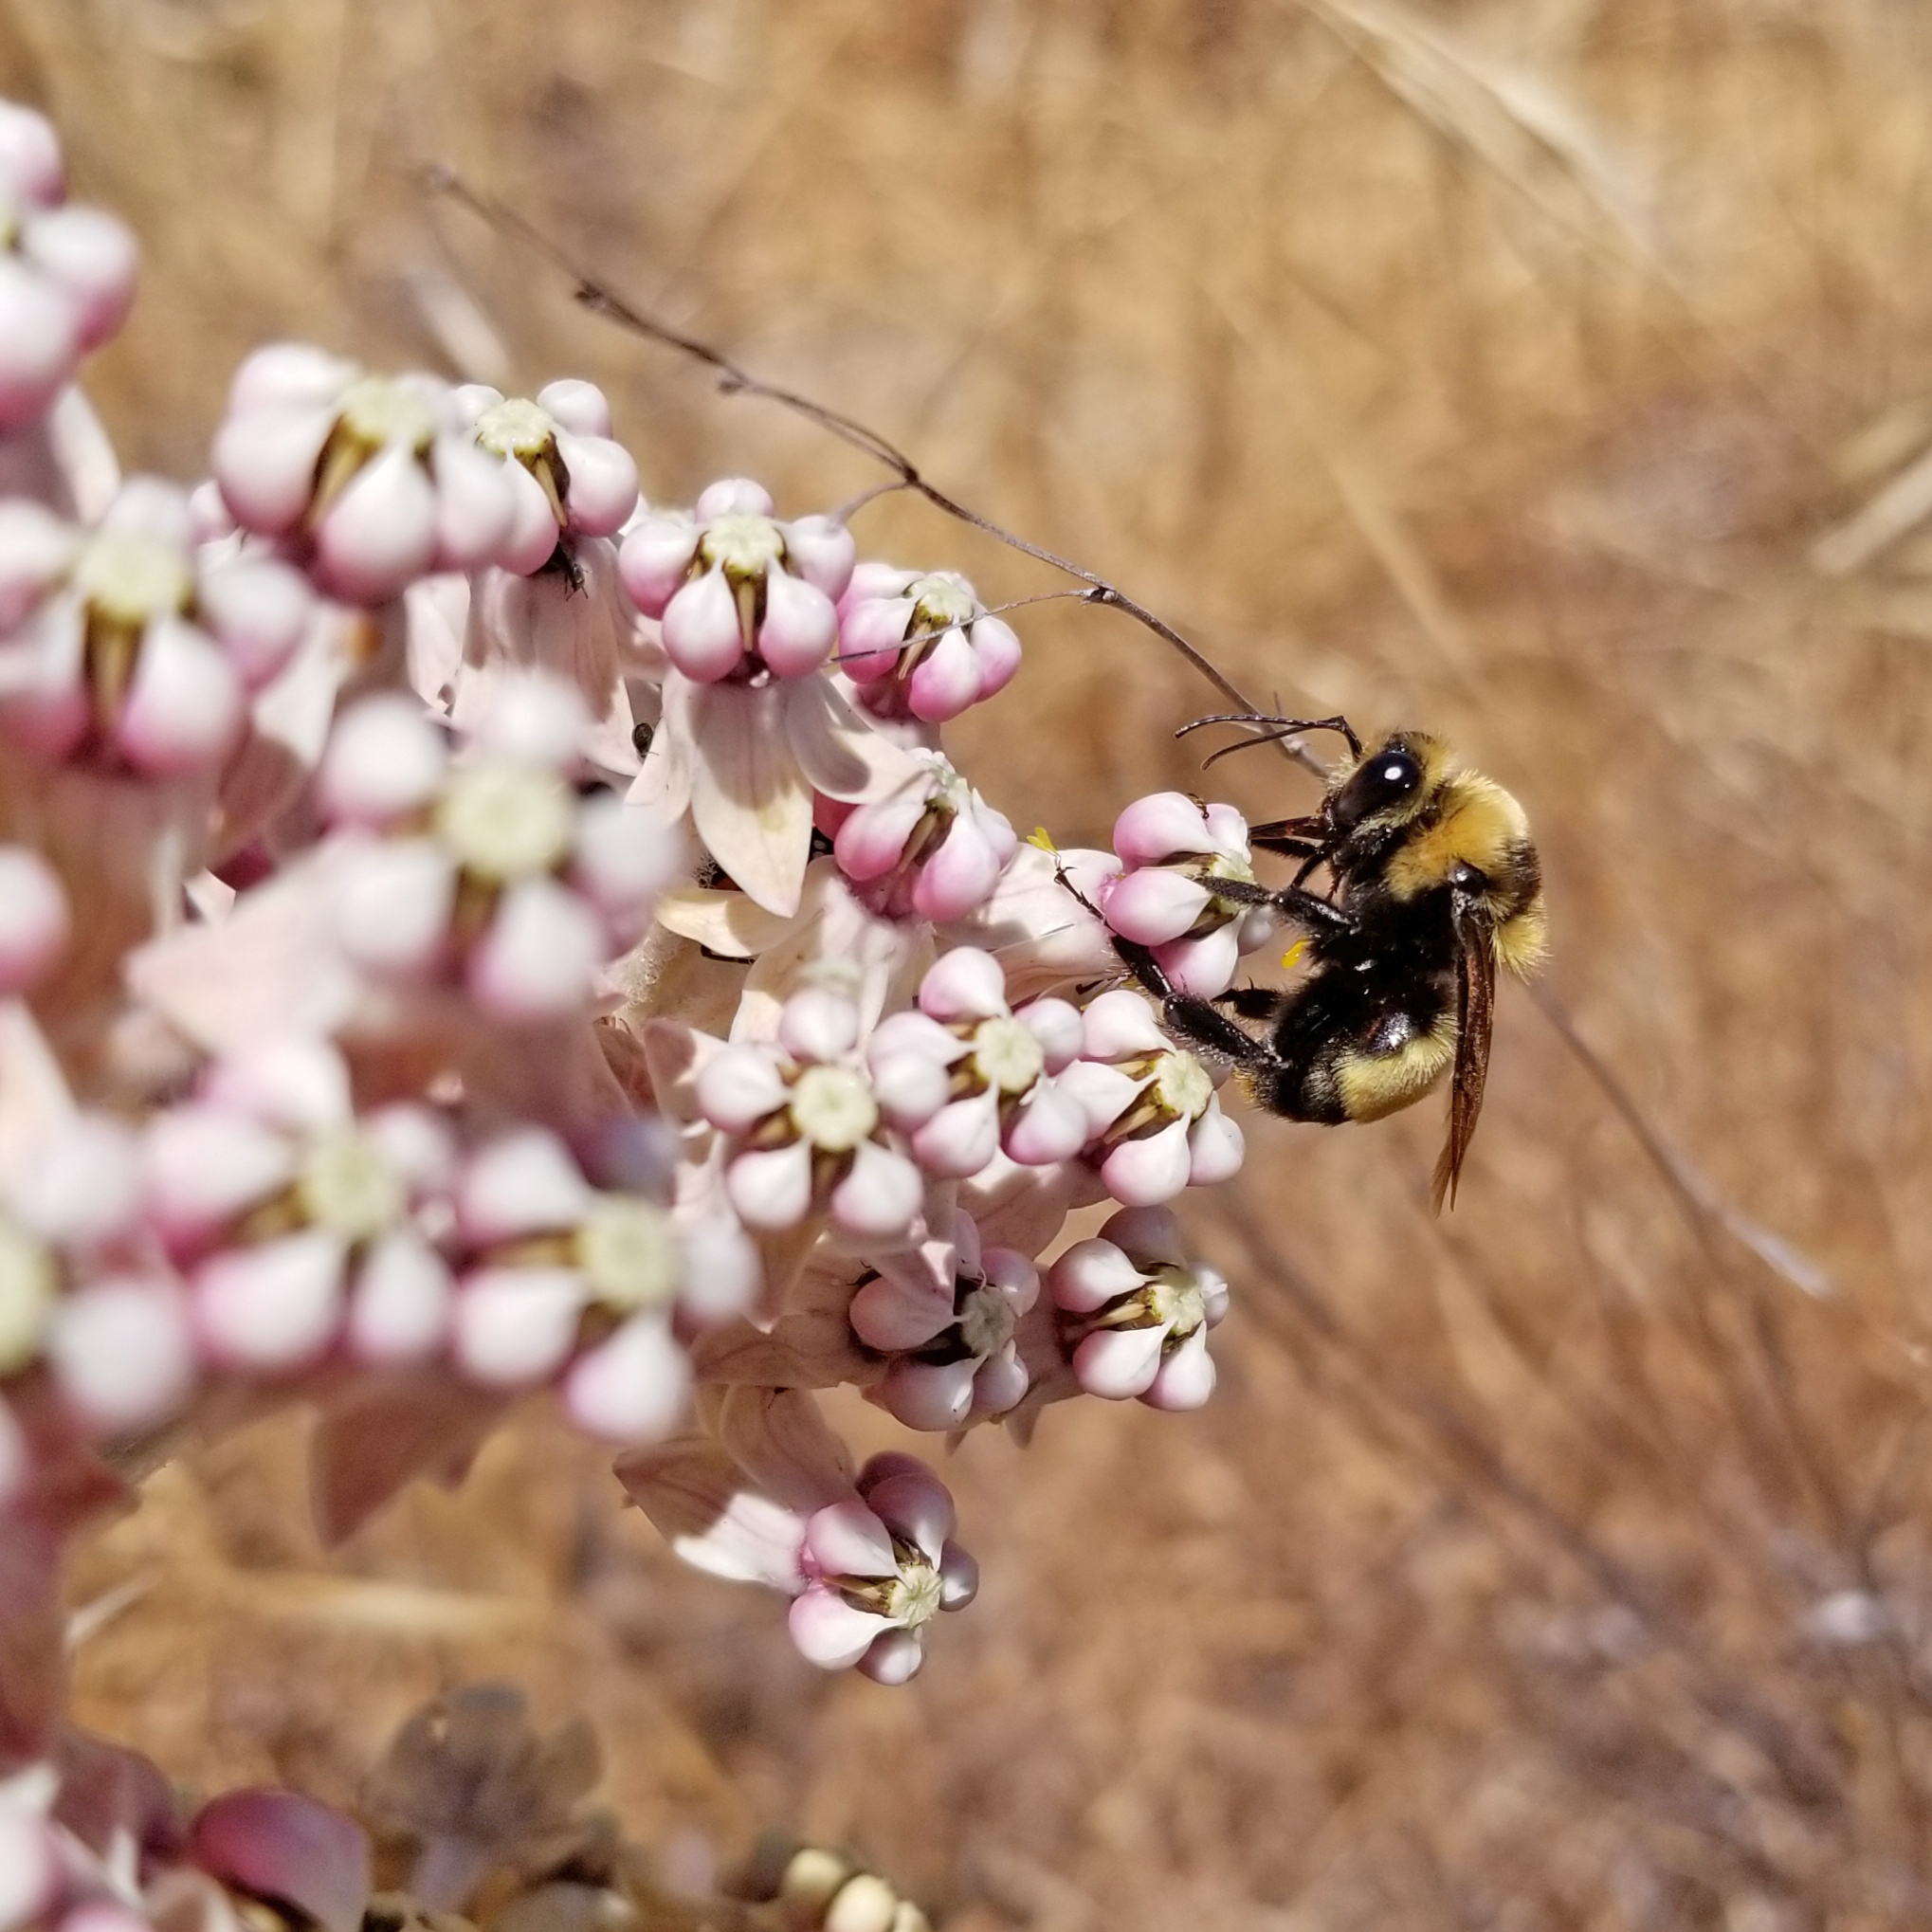 A bumble bee sits on a pale pink flower against a background of dry brush.